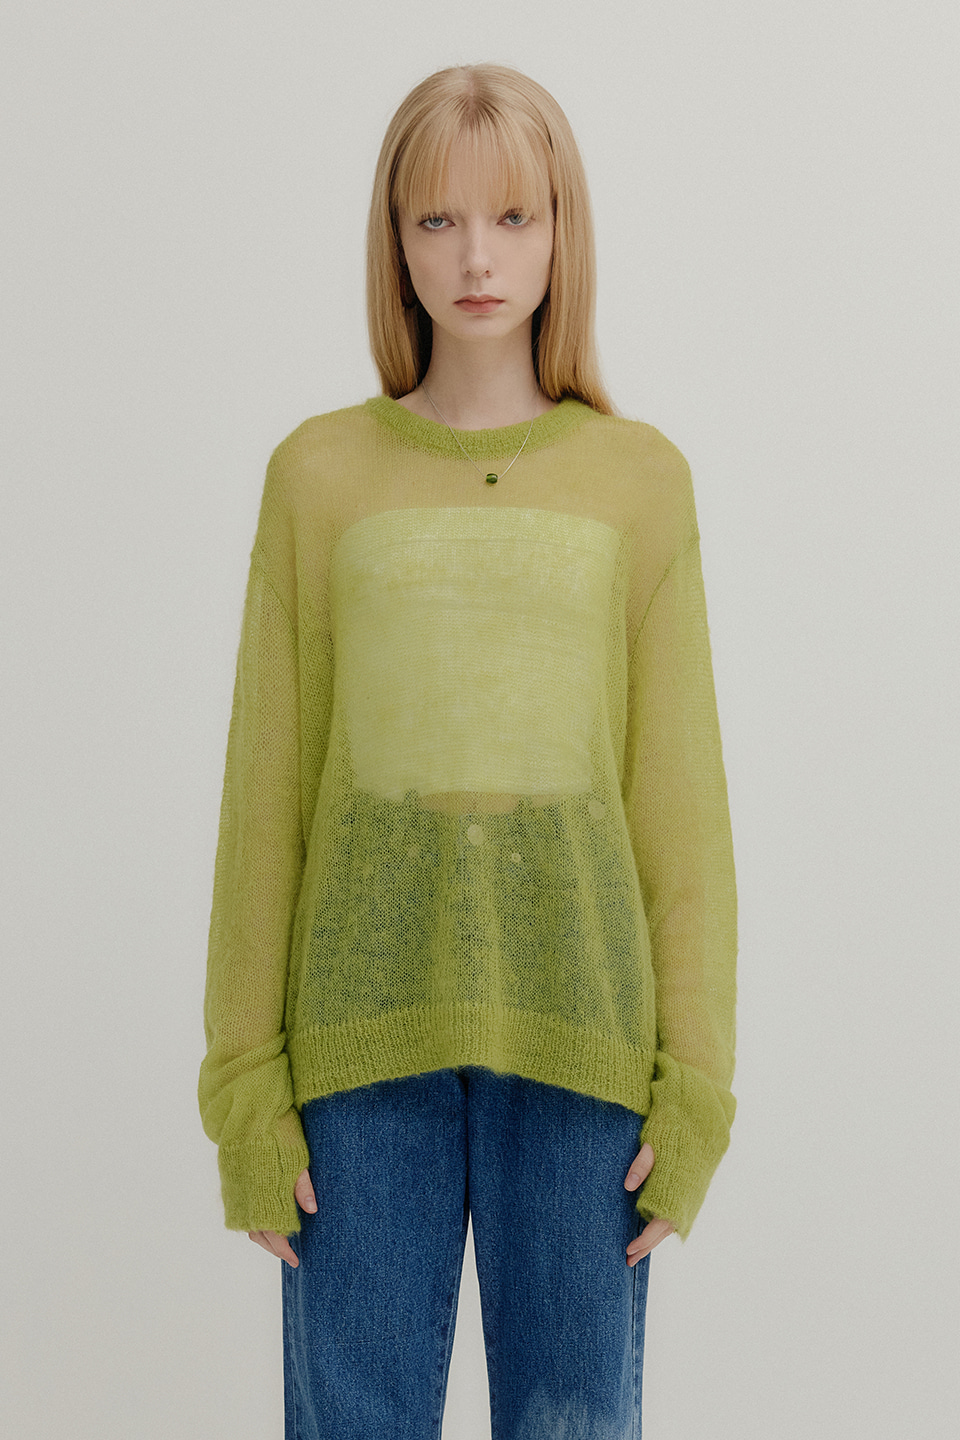 KID MOHAIR LOOSE ROUND KNIT TOP - YELLOW GREEN